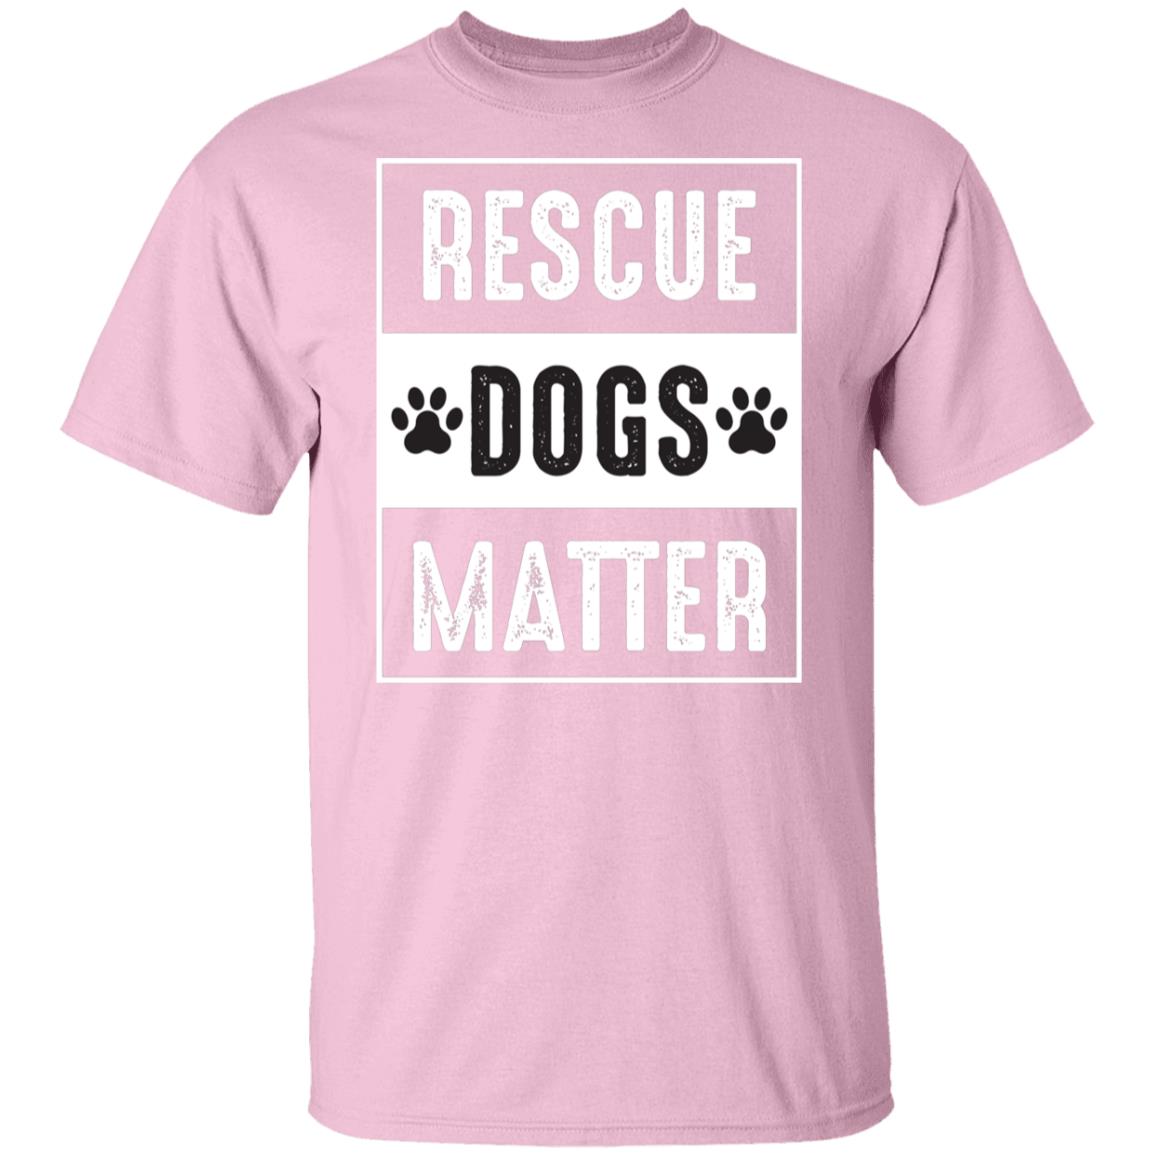 Rescue dogs matter tshirt